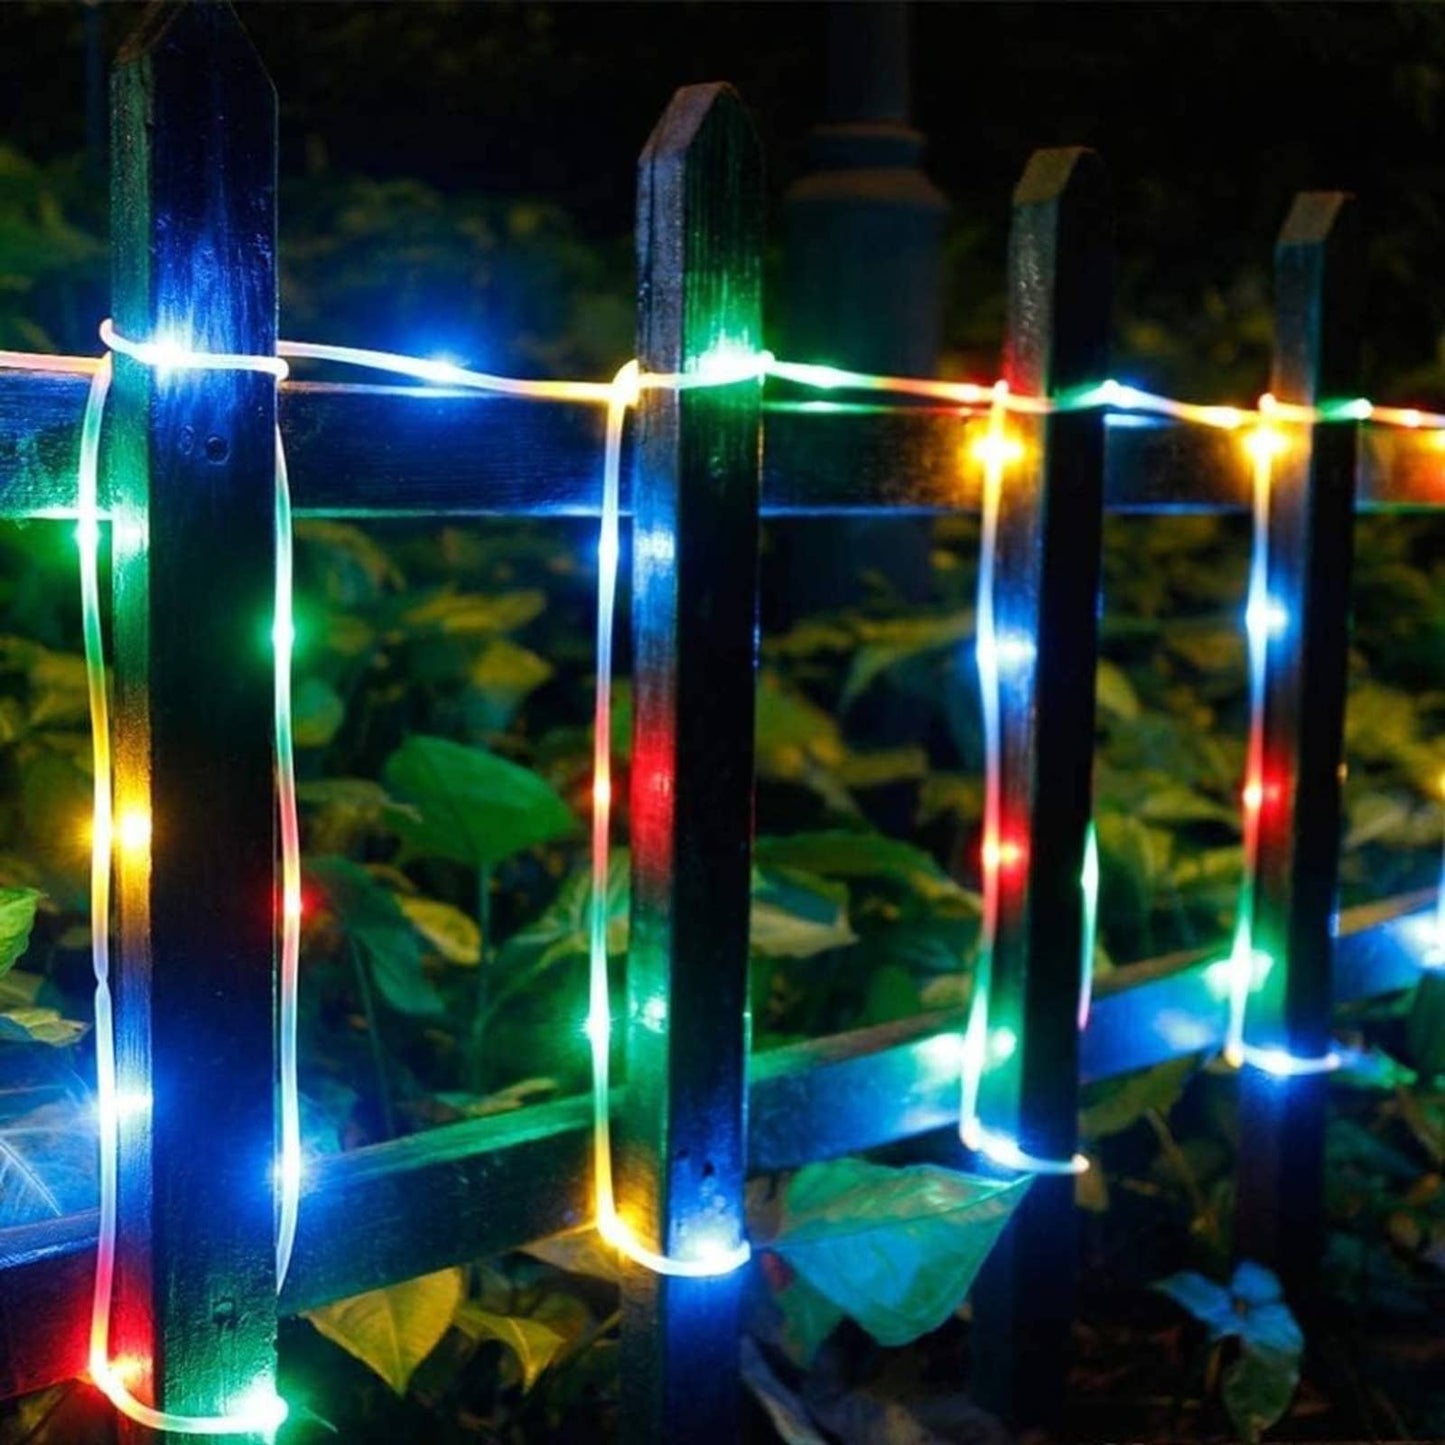 SINGCHUNGTE Colorful Rope Lights, 66Ft 200 LED Waterproof Rope Lights